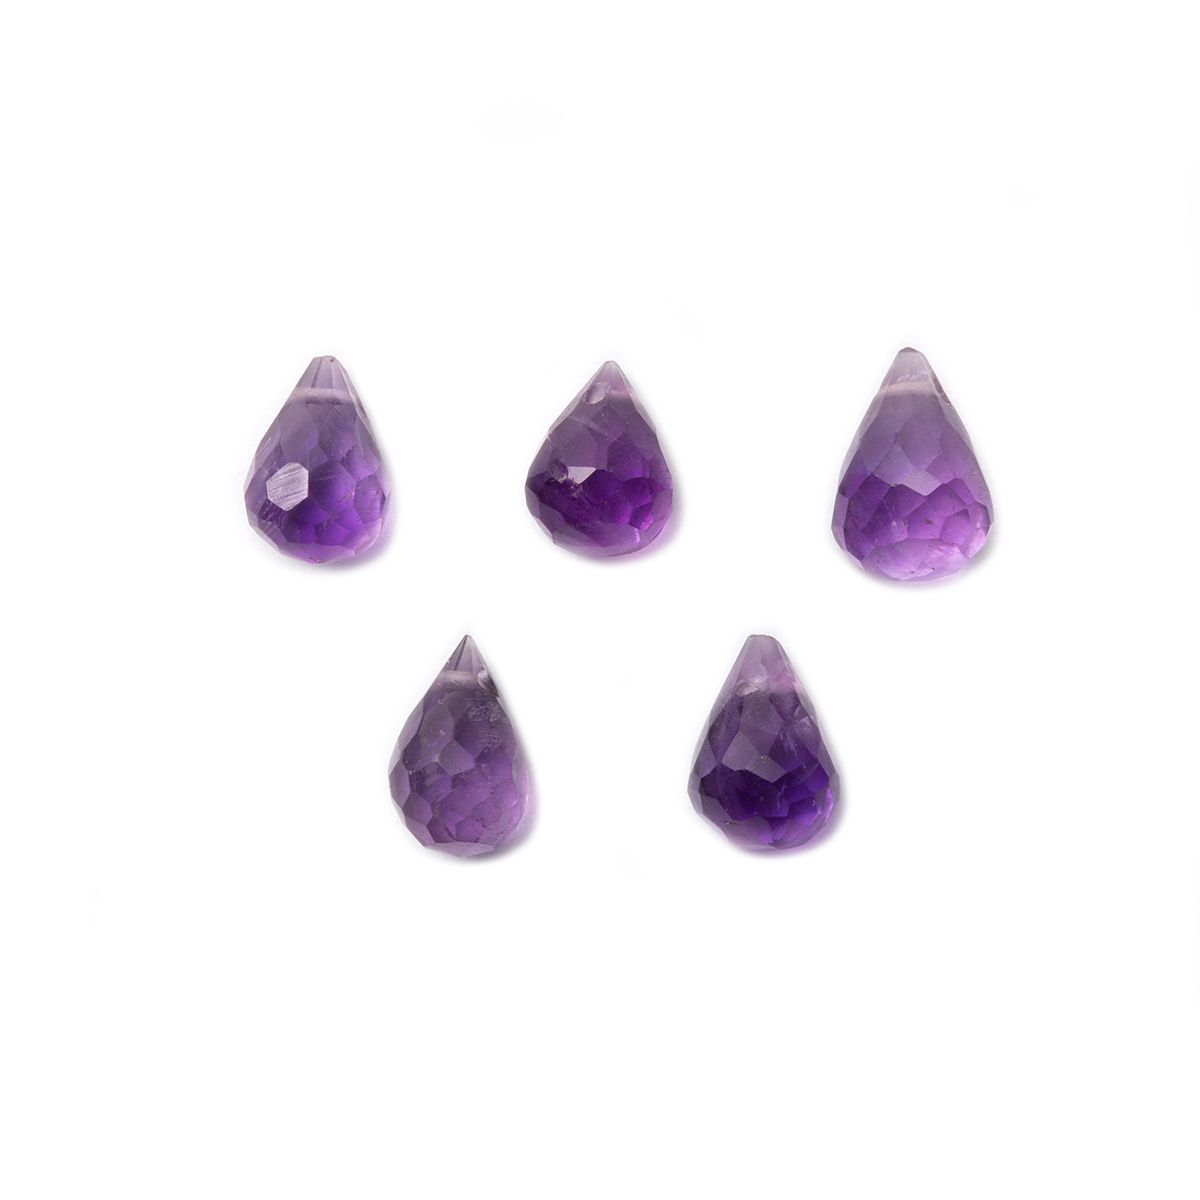 Amethyst Faceted Drop Briolette Beads, Approx 6x4mm, Pack Of 10 Beads